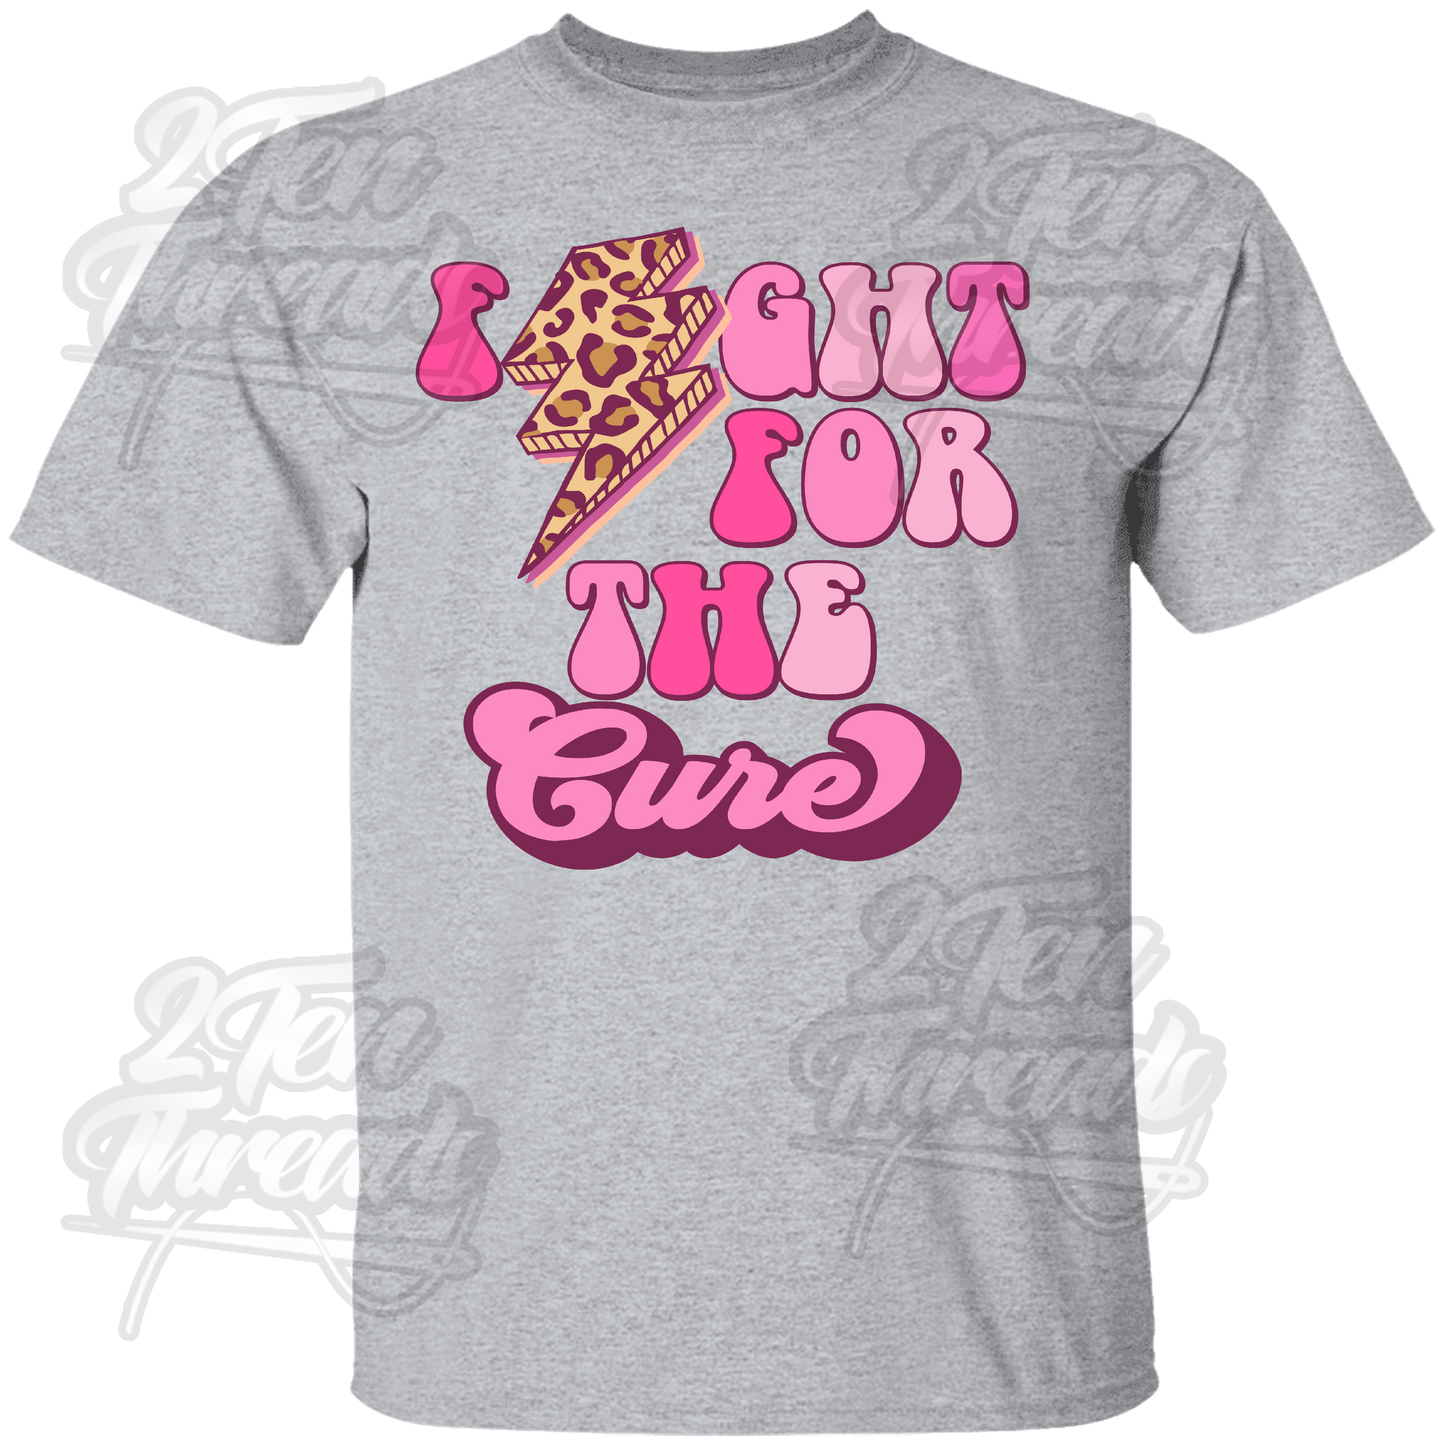 Fight for the Cure Shirt